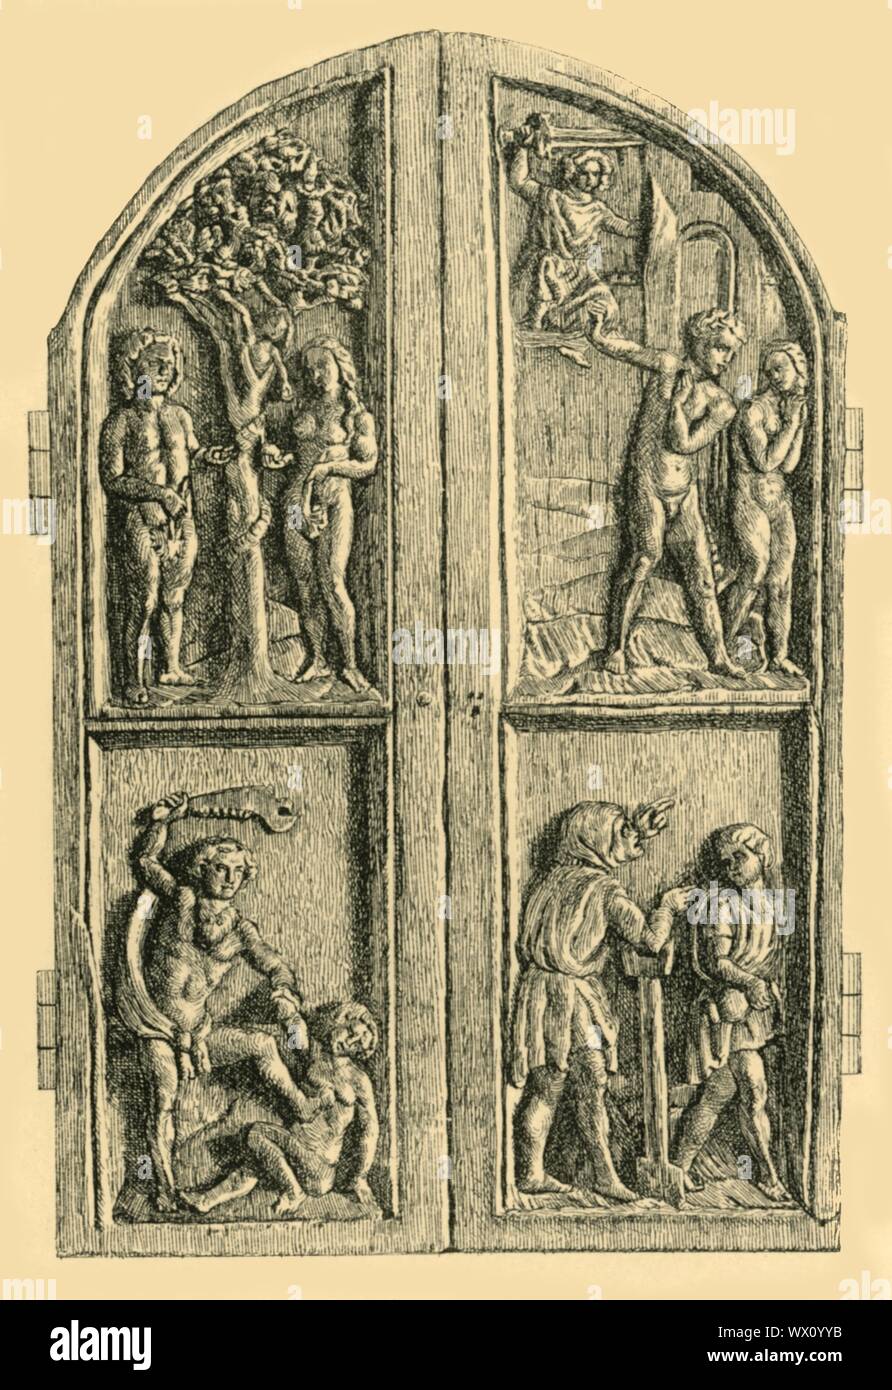 Wooden diptych with scenes from the Book of Genesis, mid 19th century, (1881). Etching of a carved and glazed diptych of boxwood and oak, made in Germany before 1860. The closed wings depict four subjects from the Fall based on engravings by the 15th-century printmaker Martin Schongauer: The Temptation of Adam and Eve, The expulsion from Paradise, The killing of Abel, and Cain is made a fugitive. From &quot;The South Kensington Museum&quot;, a book of engraved illustrations, with descriptions, of the works of art in the collection of the Victoria &amp; Albert Museum in London (formerly known a Stock Photo